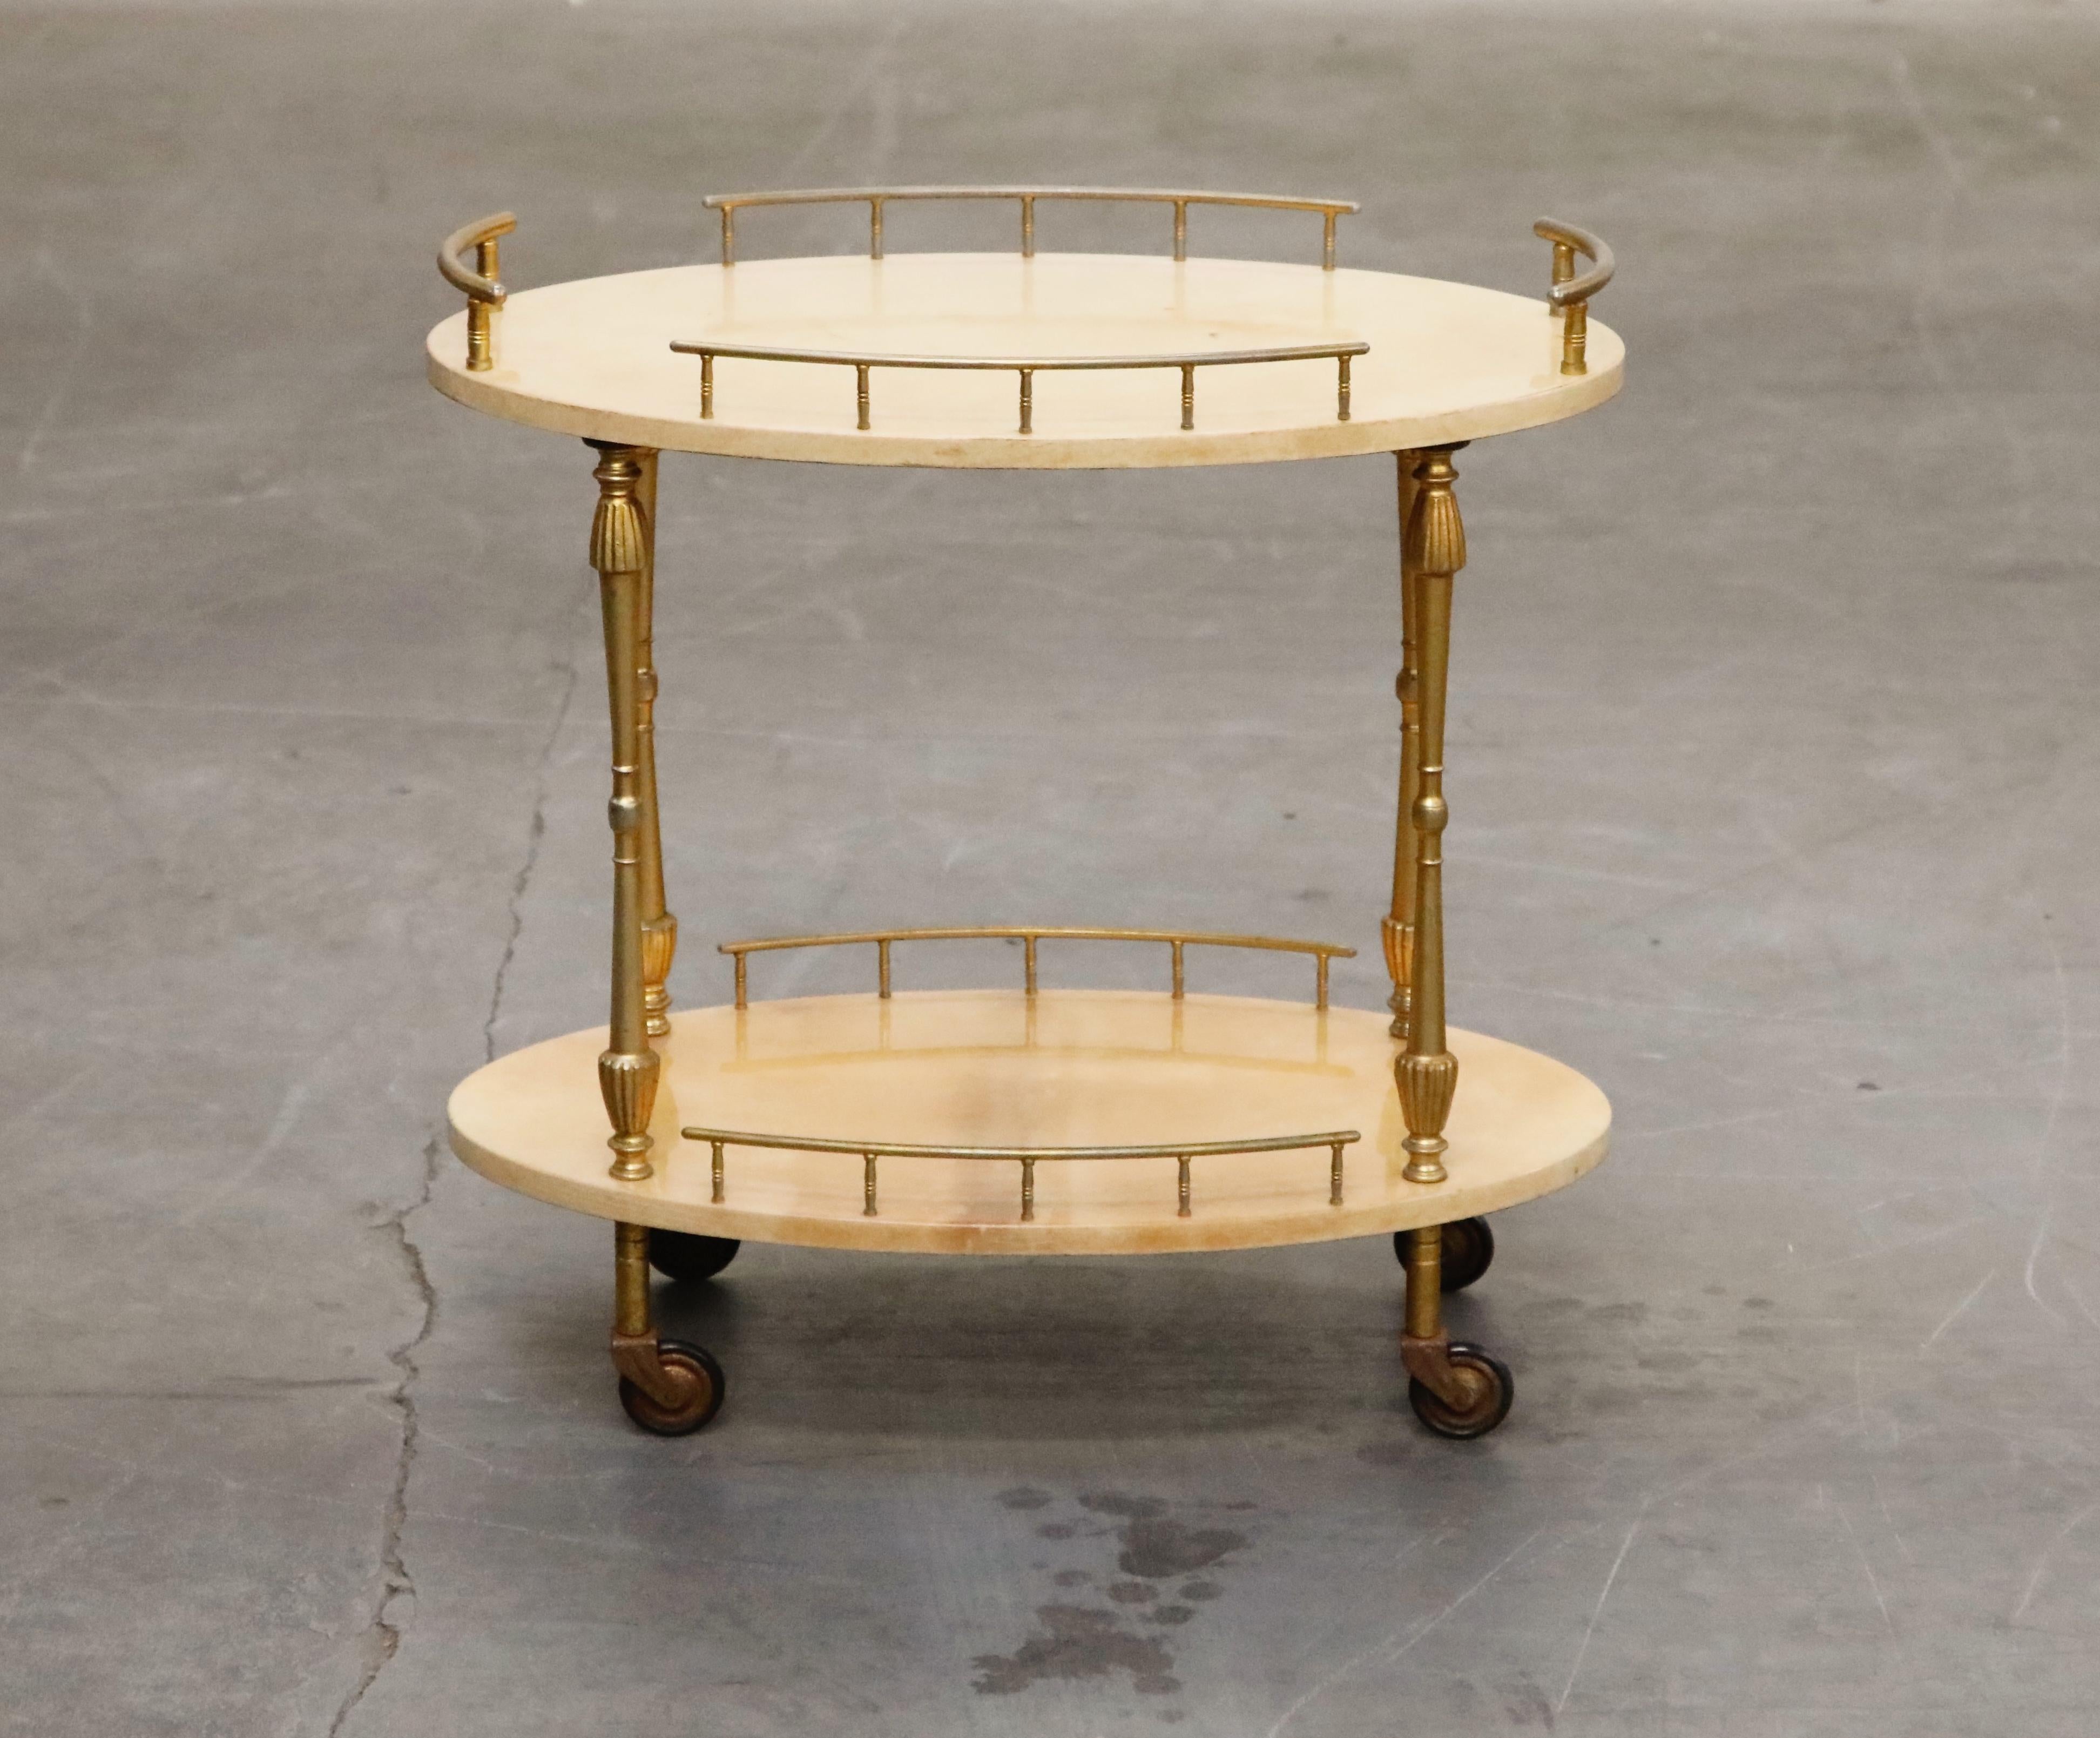 Beautiful bar cart by Italian artist-craftsman Aldo Tura, featuring the designers distinct use of brass and lacquered goatskin that Tura was well-known for. The quality of Aldo Tura's craftsmanship can be attributed to the fact that his work was